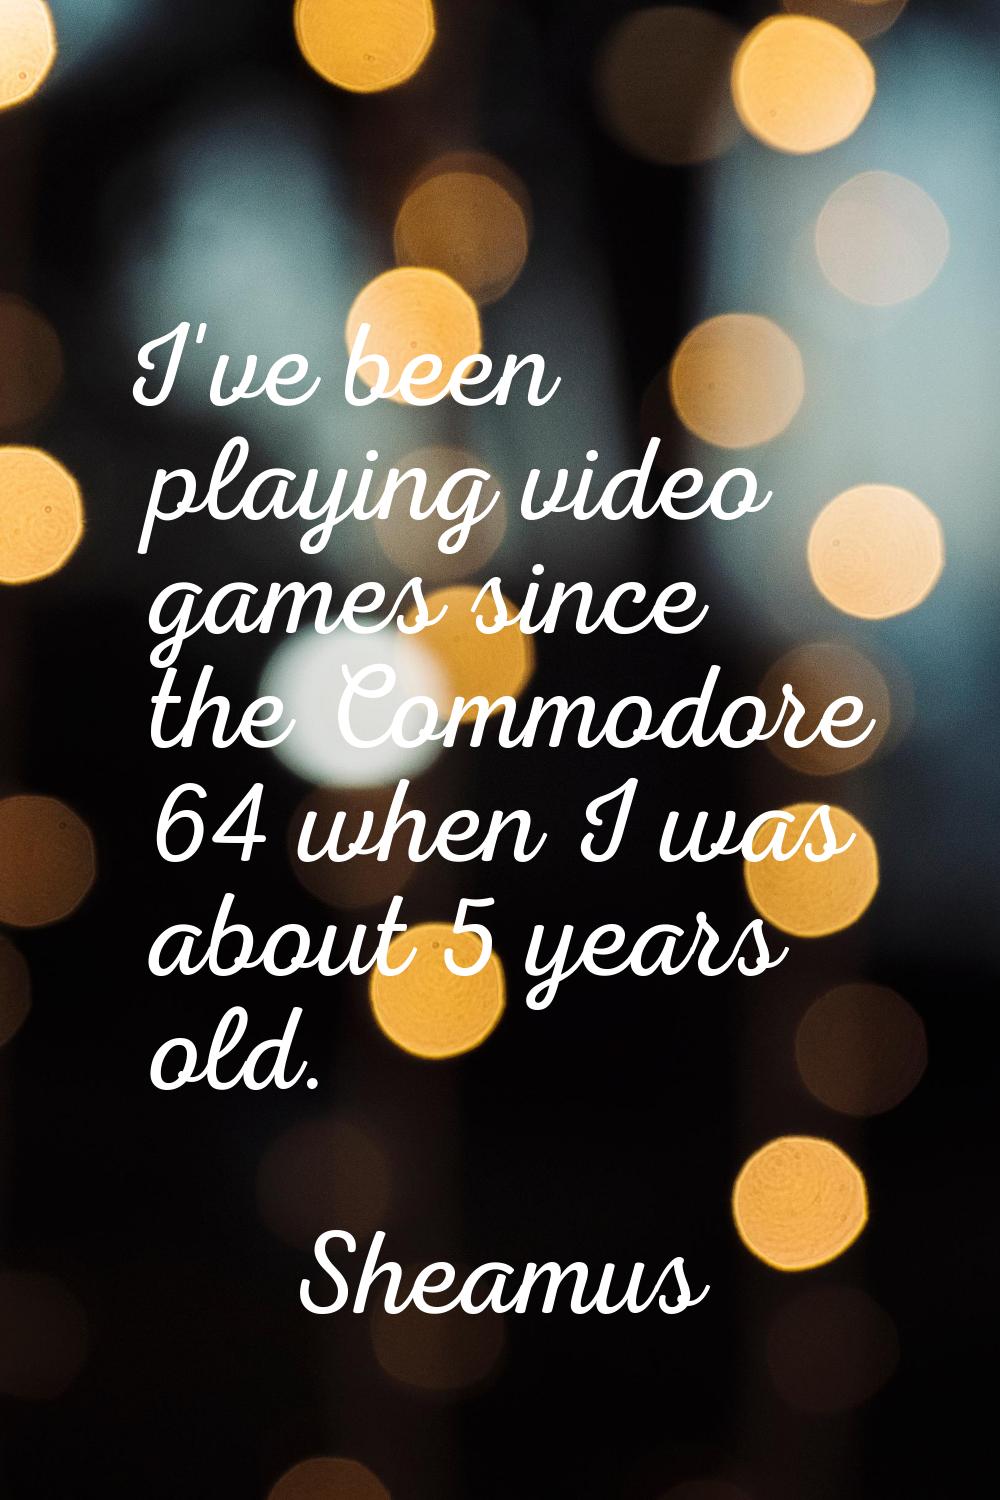 I've been playing video games since the Commodore 64 when I was about 5 years old.